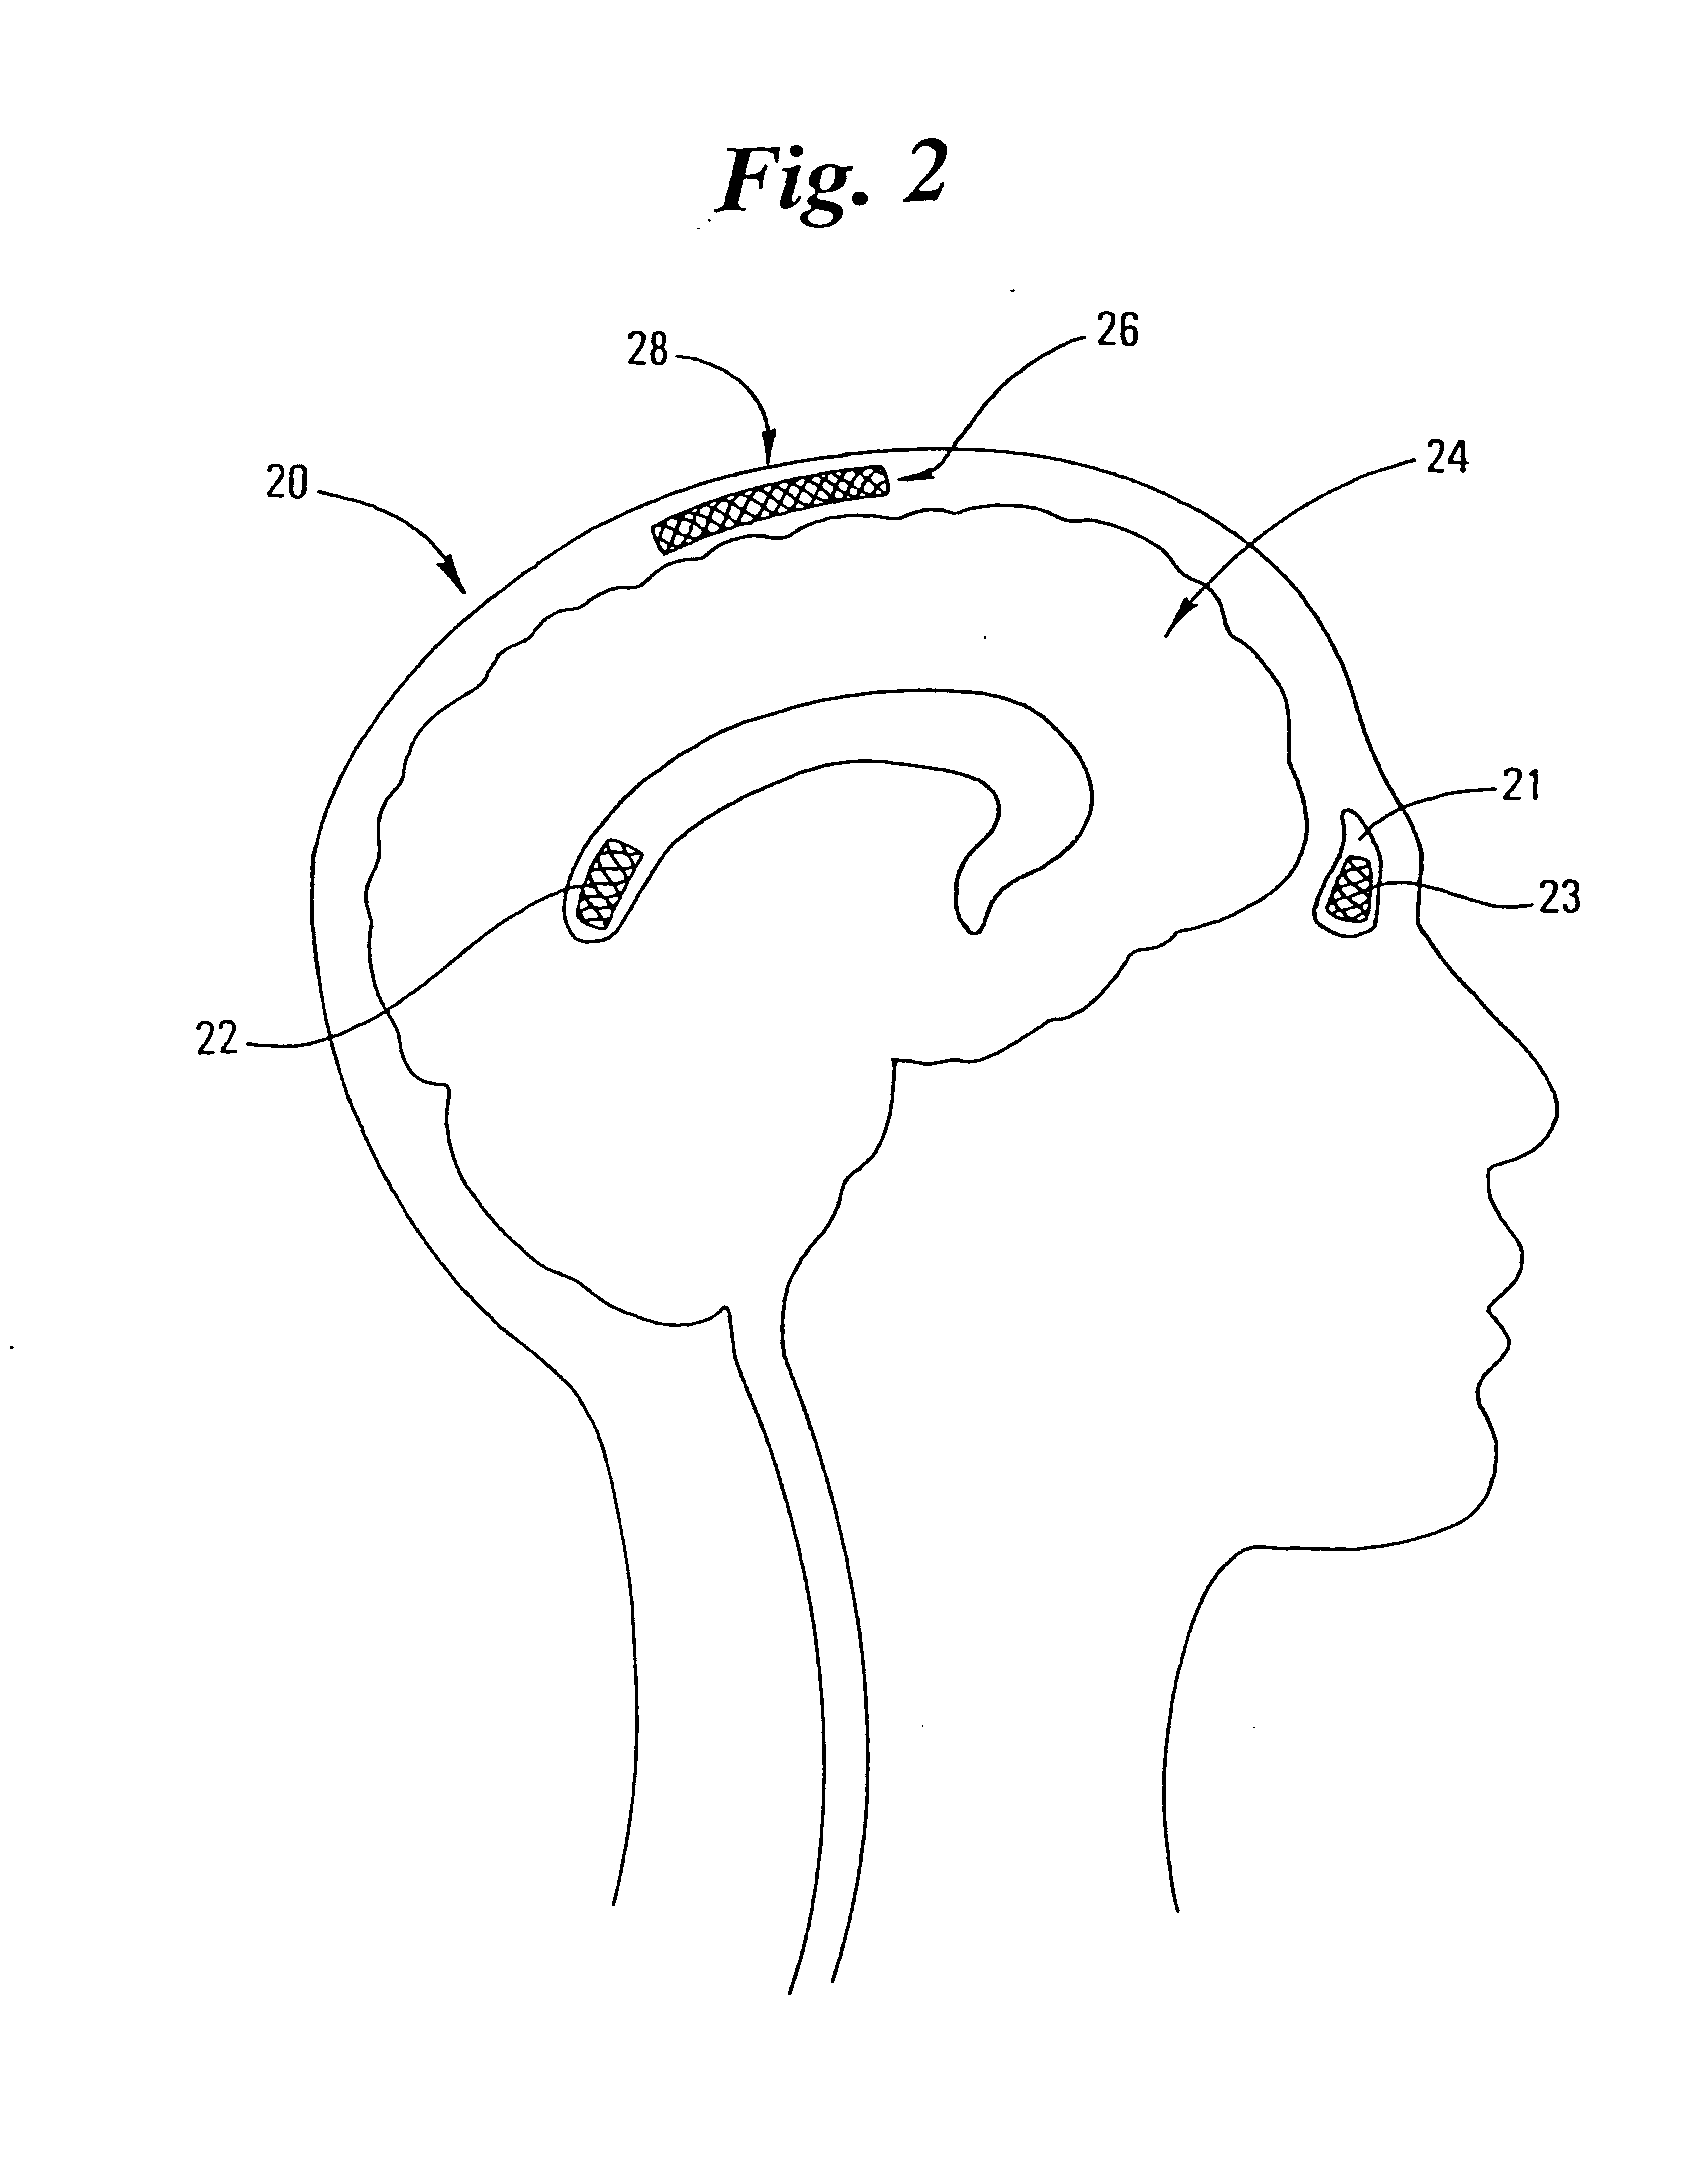 Methods and devices for the treatment of neurological and physiological disorders